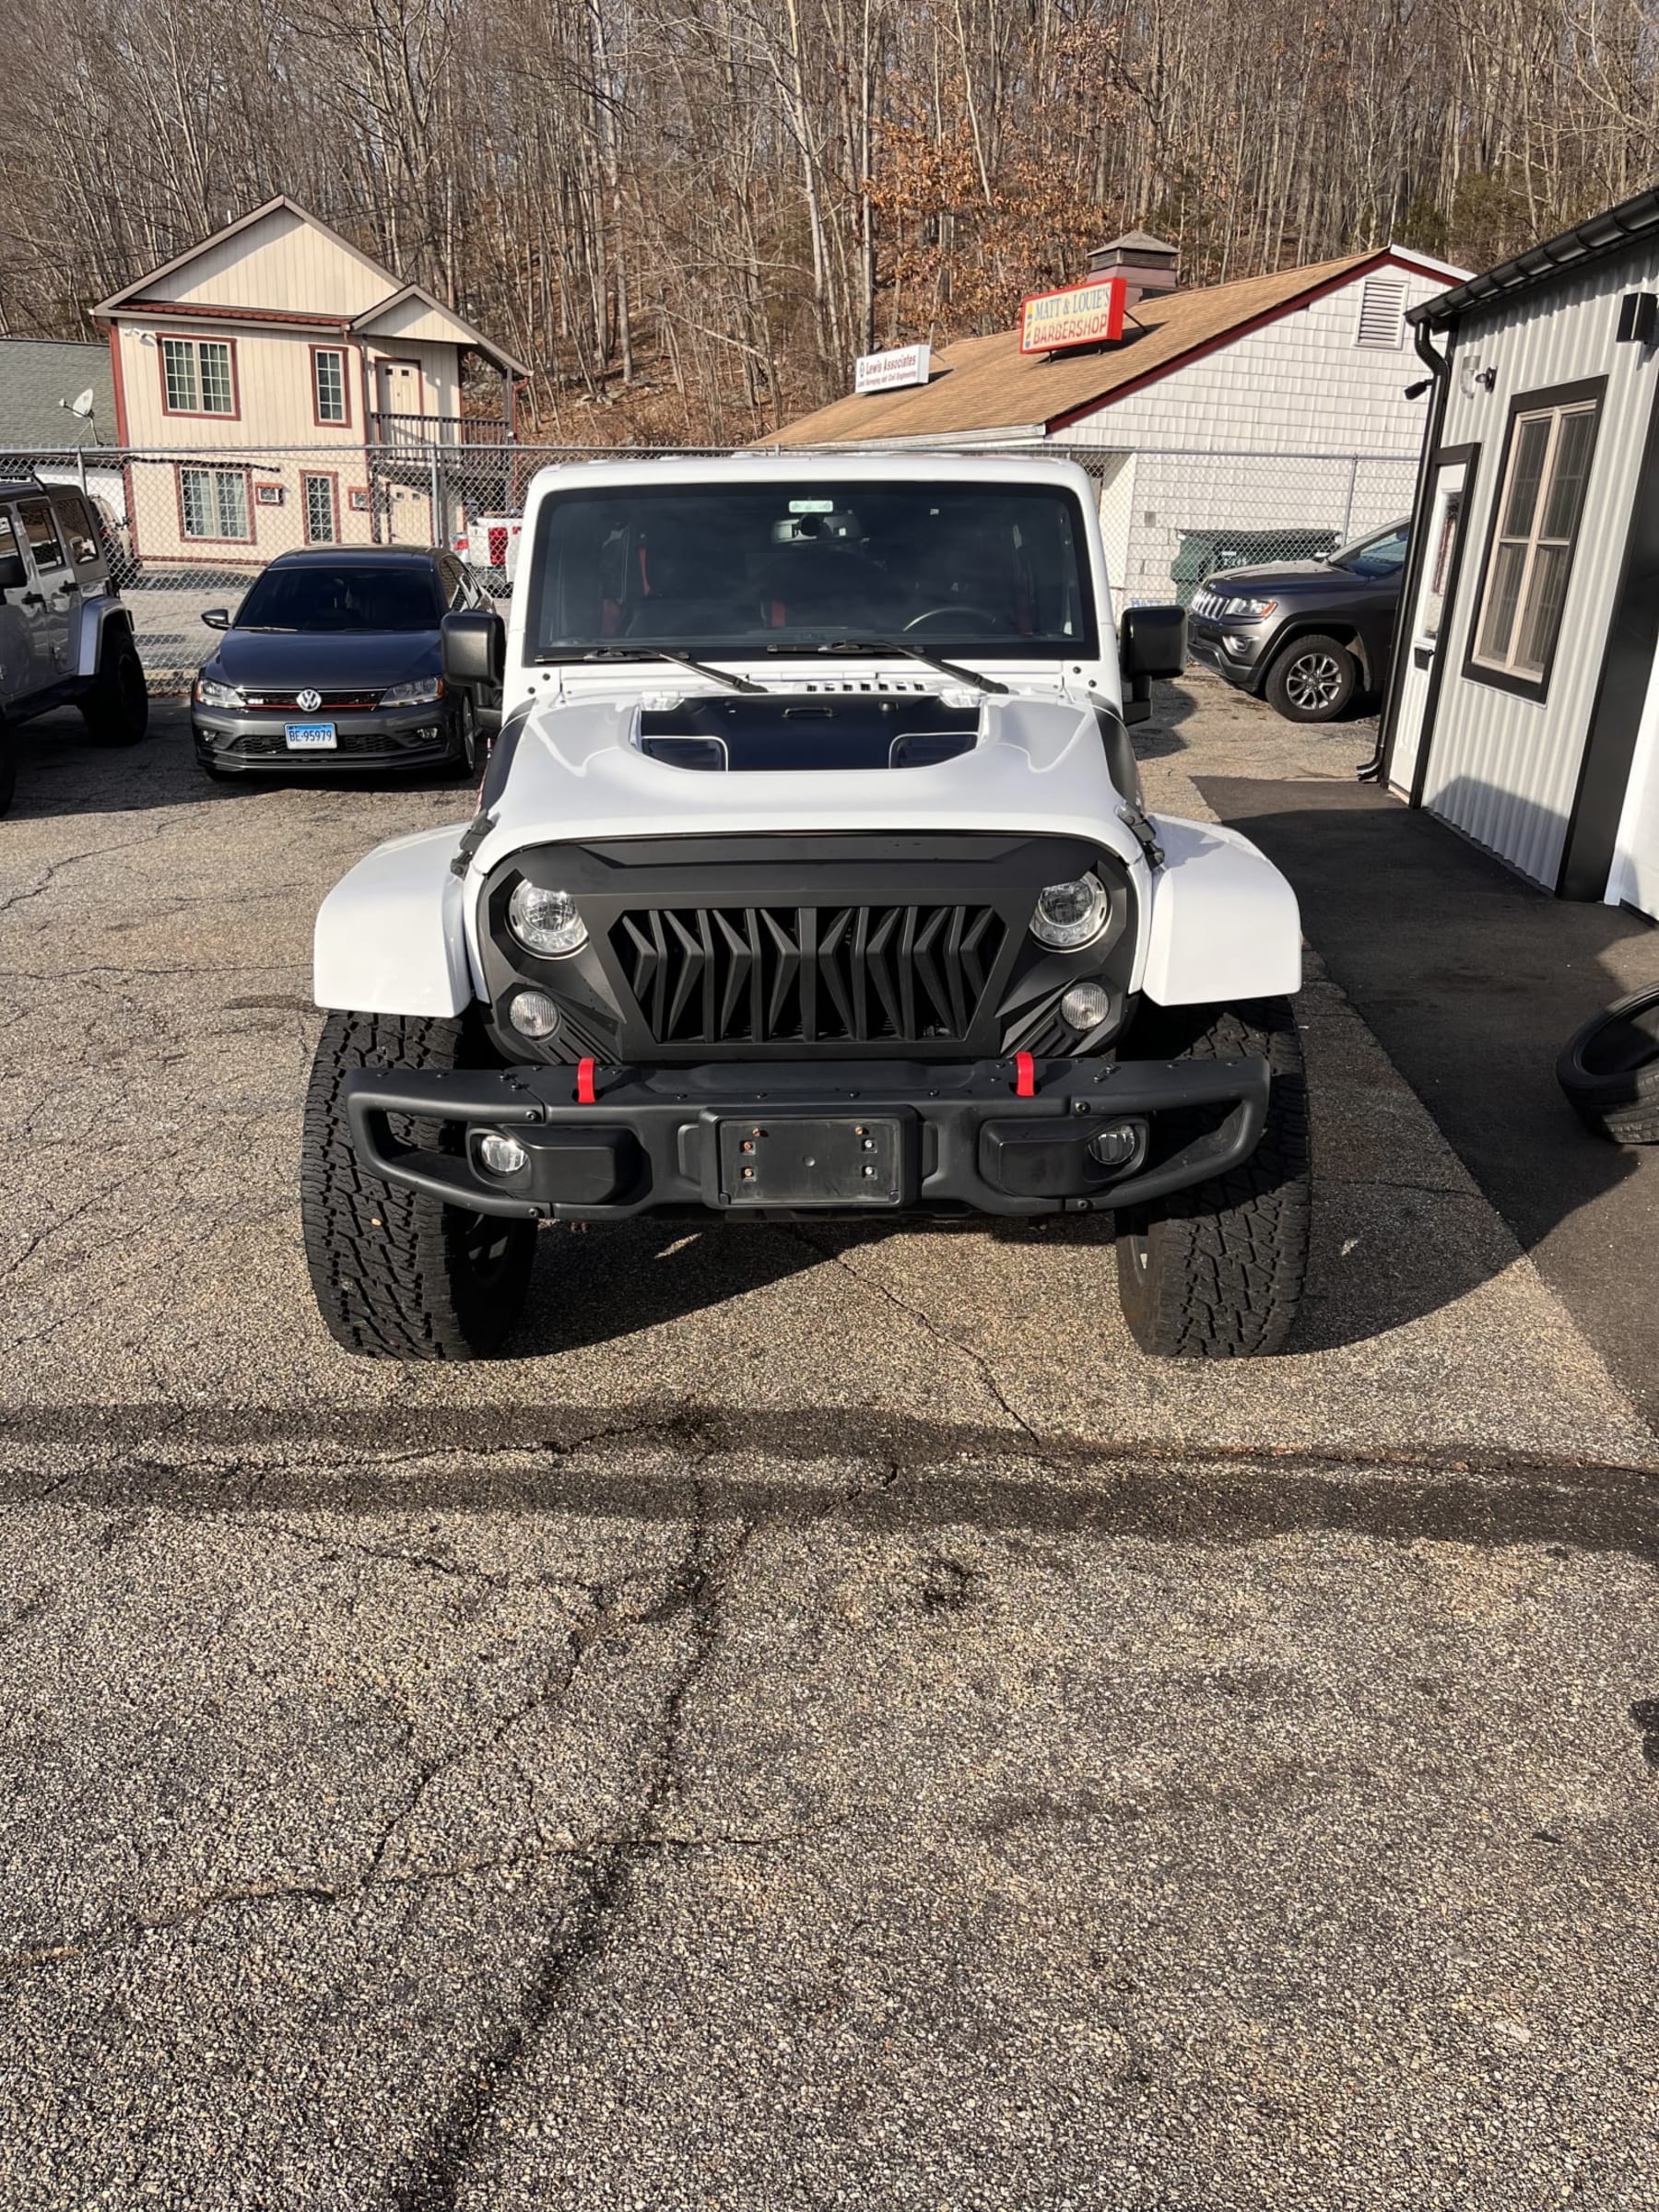 2017 Jeep unlimited wrangler rubicon recon! Only 53k miles! Leather, navigation, heated seats, lifted, wheels and tires, body colored matching hardtop and much much more! Priced WELL BELOW retail! $35,900